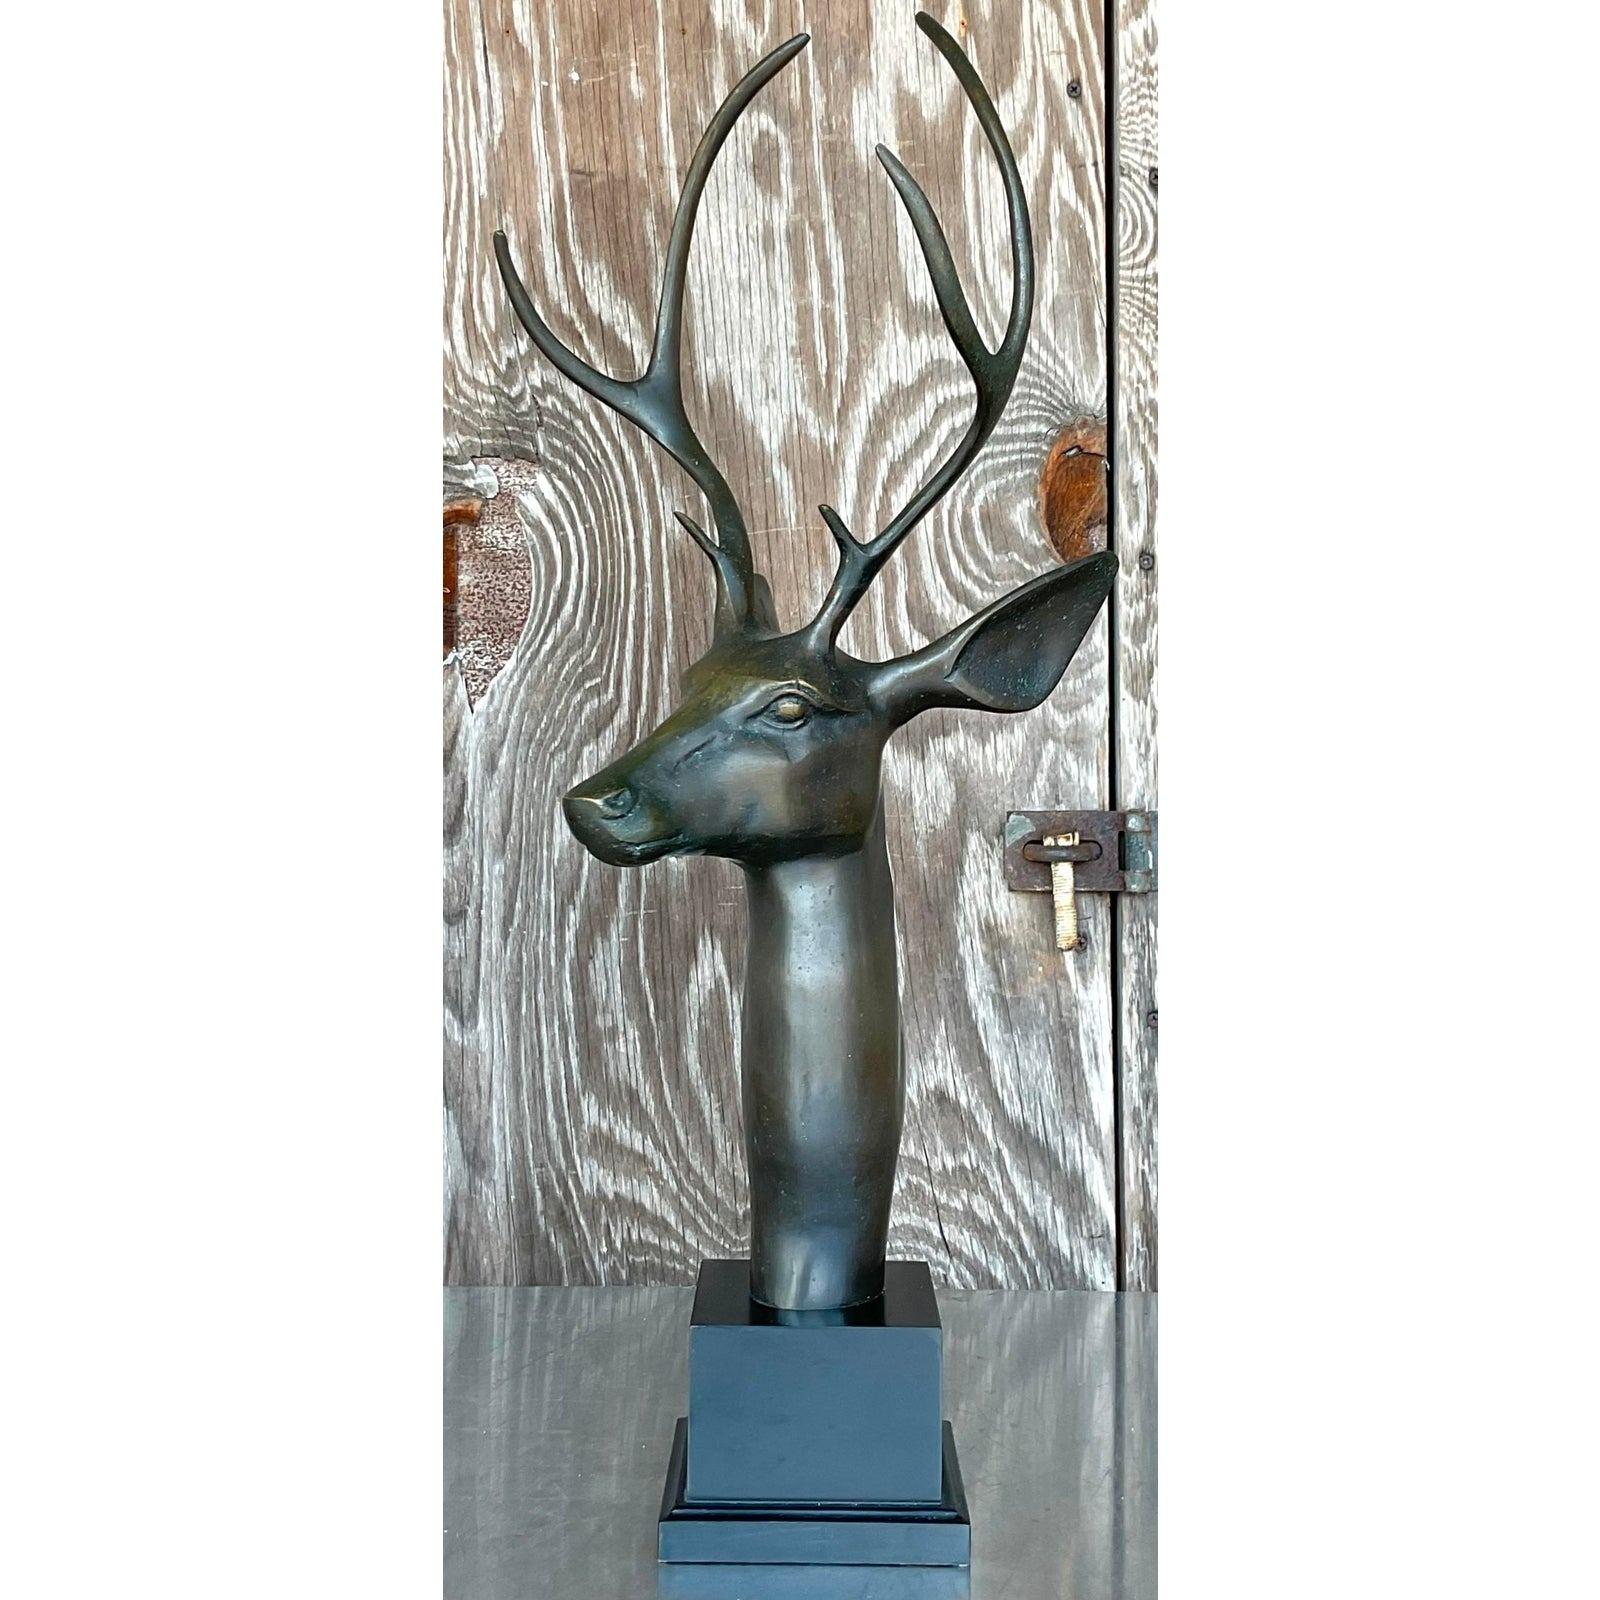 A stunning vintage Boho sculpture in bronze. A chic and commanding six point stag on a wooden plinth. Acquired from a Palm Beach estate.